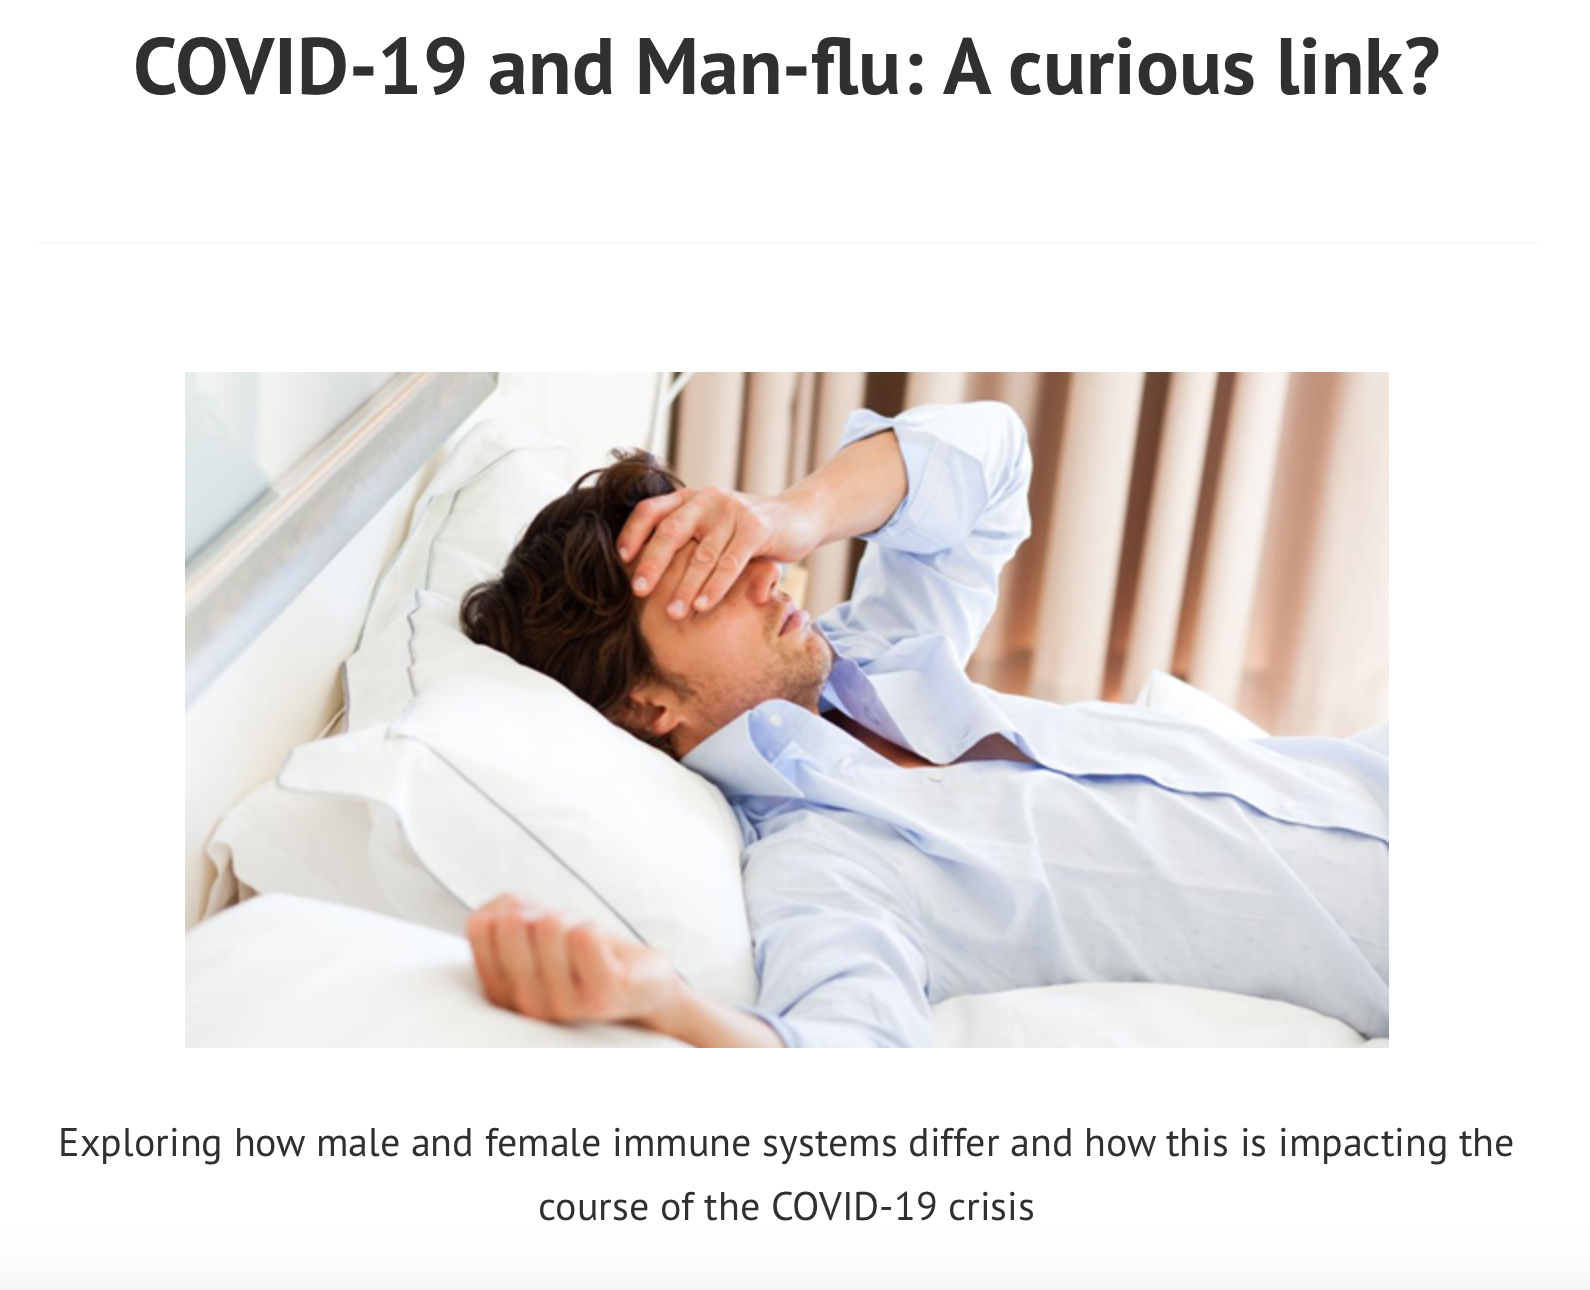 COVID-19 and man-flu: A curious link?